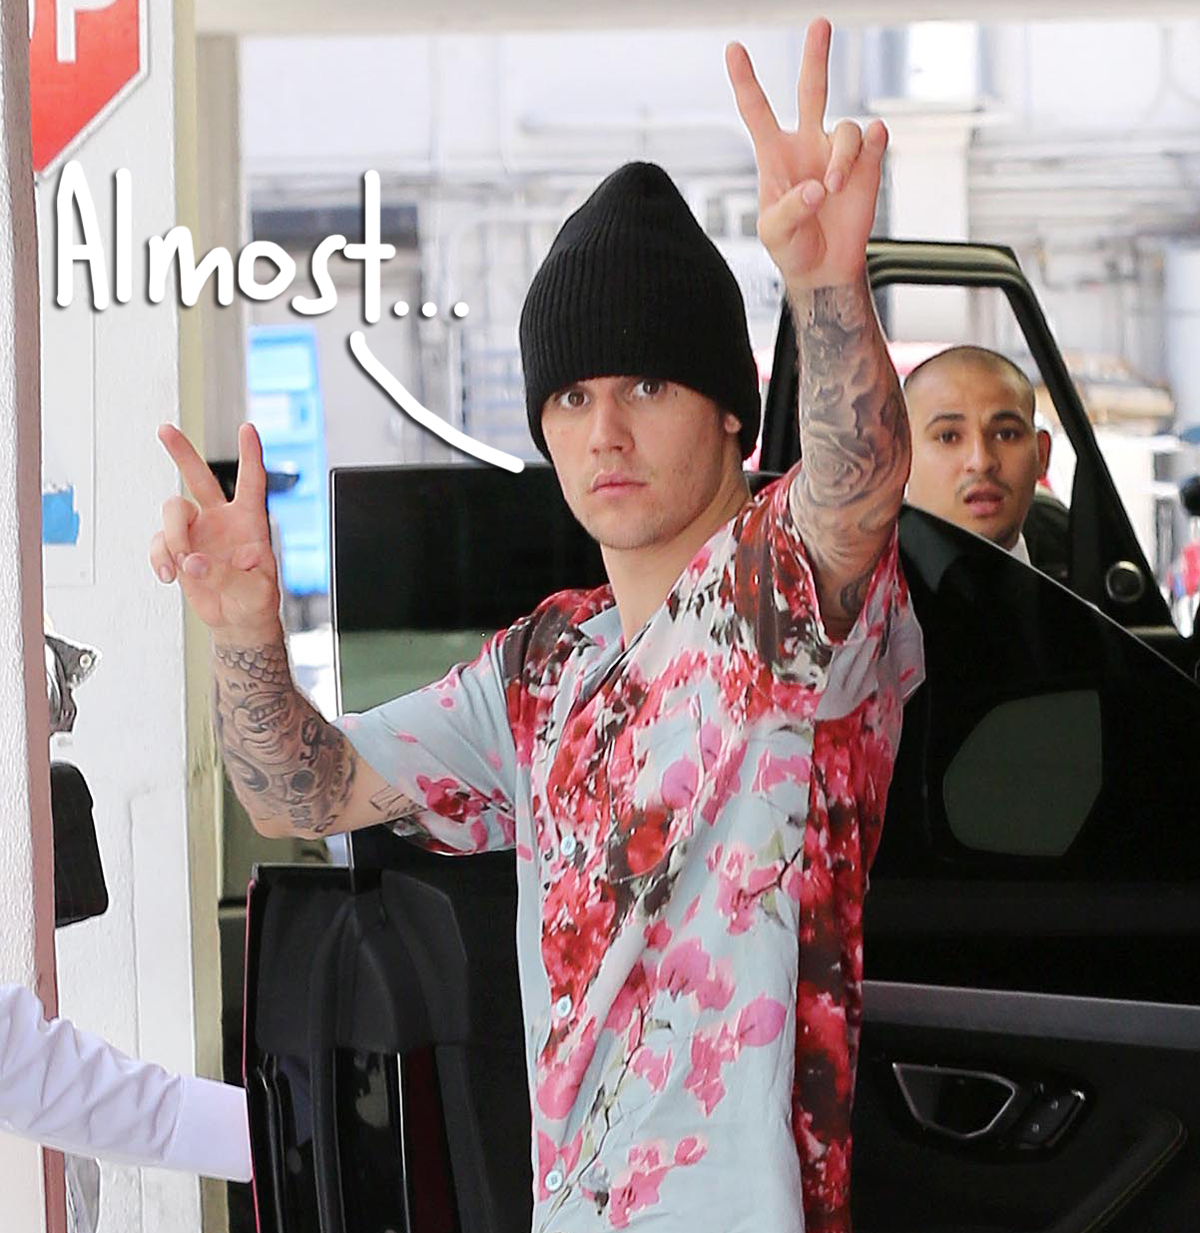 Justin Bieber's New Album 'Will Be Released Very Soon' - & He's Already Rehearsing For Tour ...